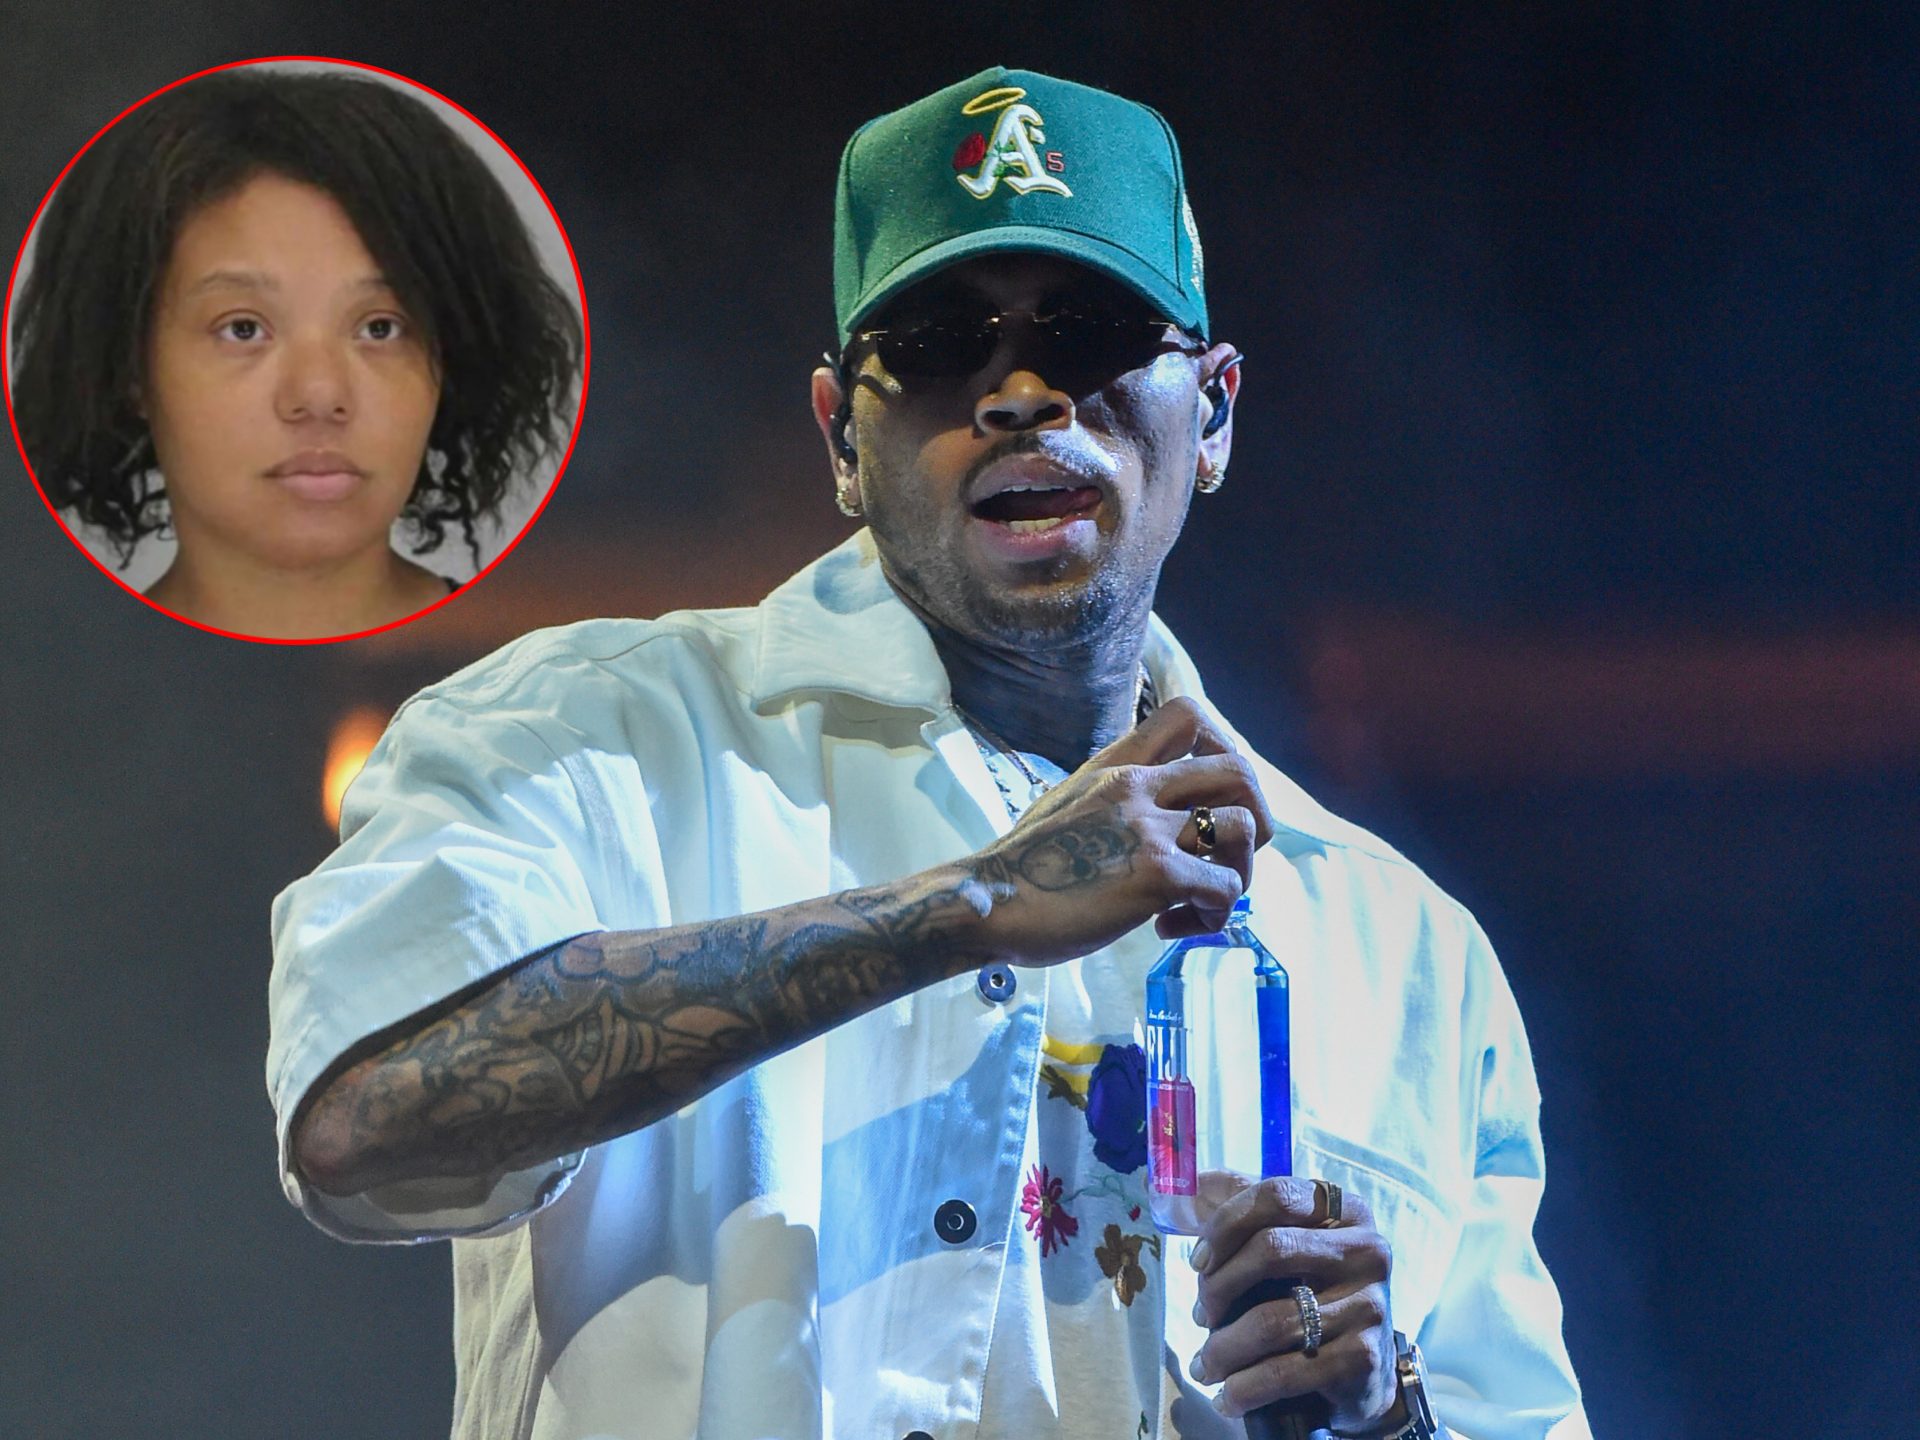 Chris Brown Responds After It's Revealed The Dallas Airport Suspected Shooter Reportedly Claimed That He Was Her Husband